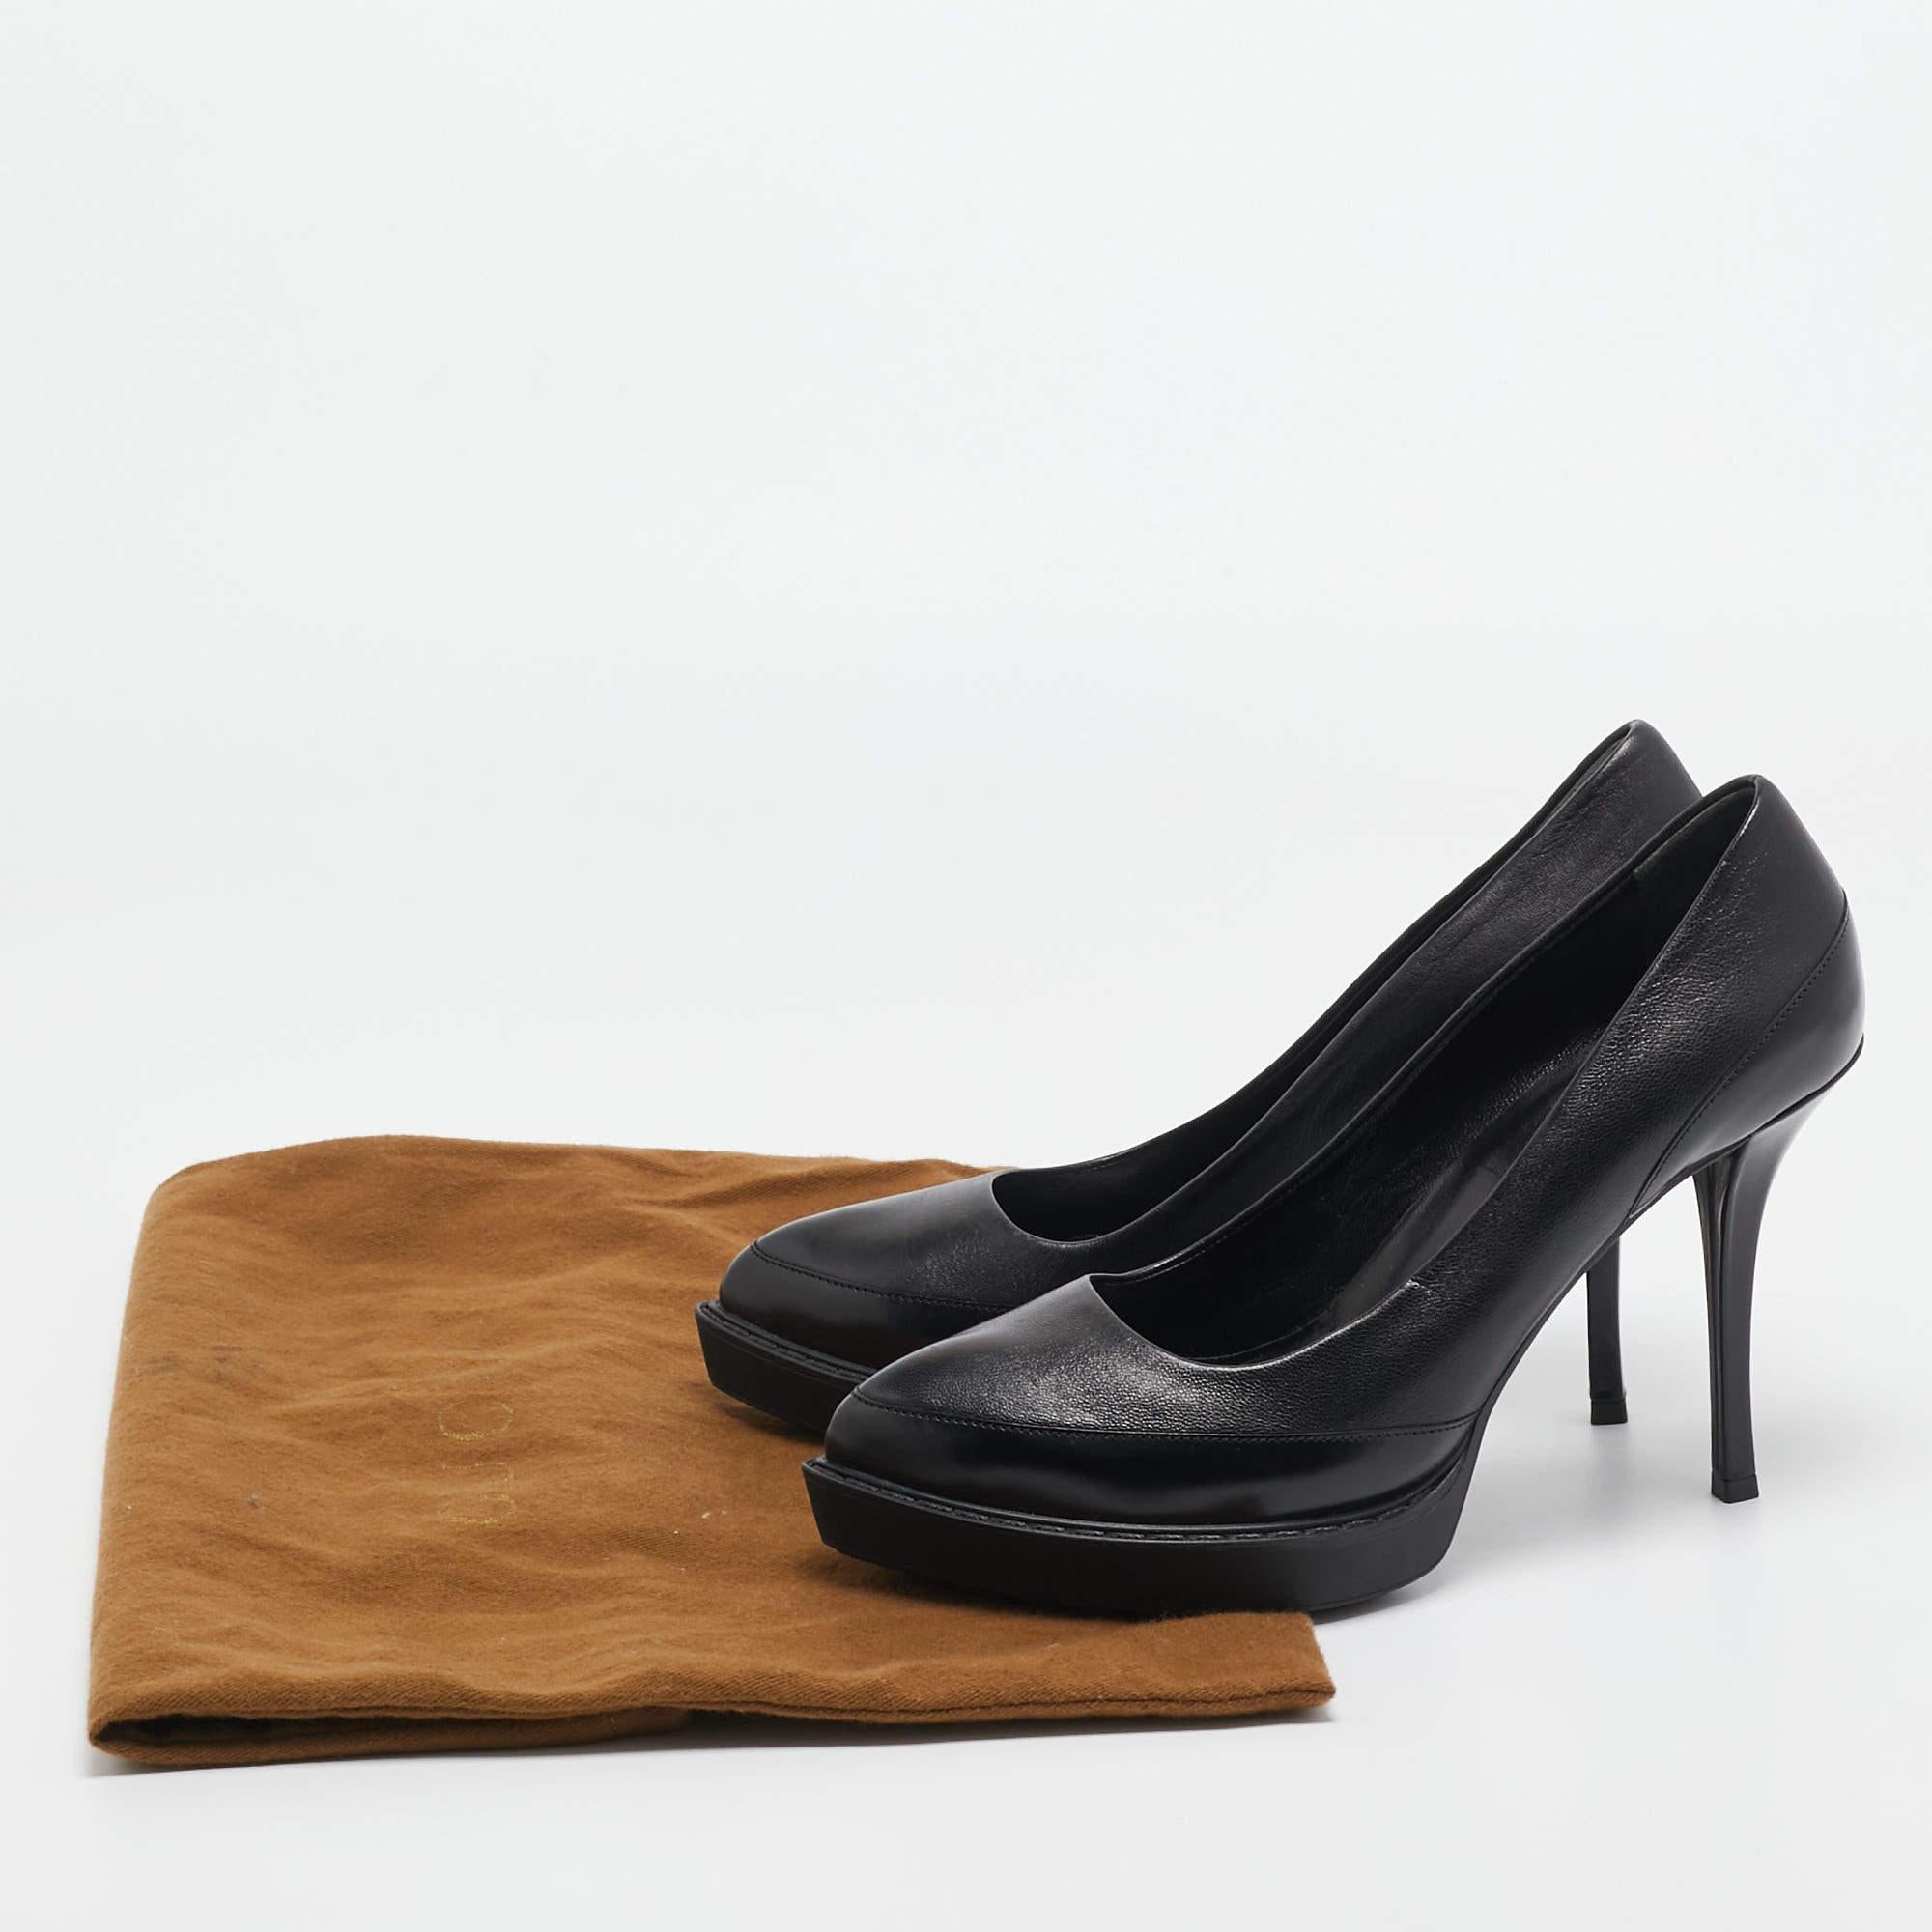 Gucci Black Leather Pointed Toe Pumps Size 38 For Sale 5